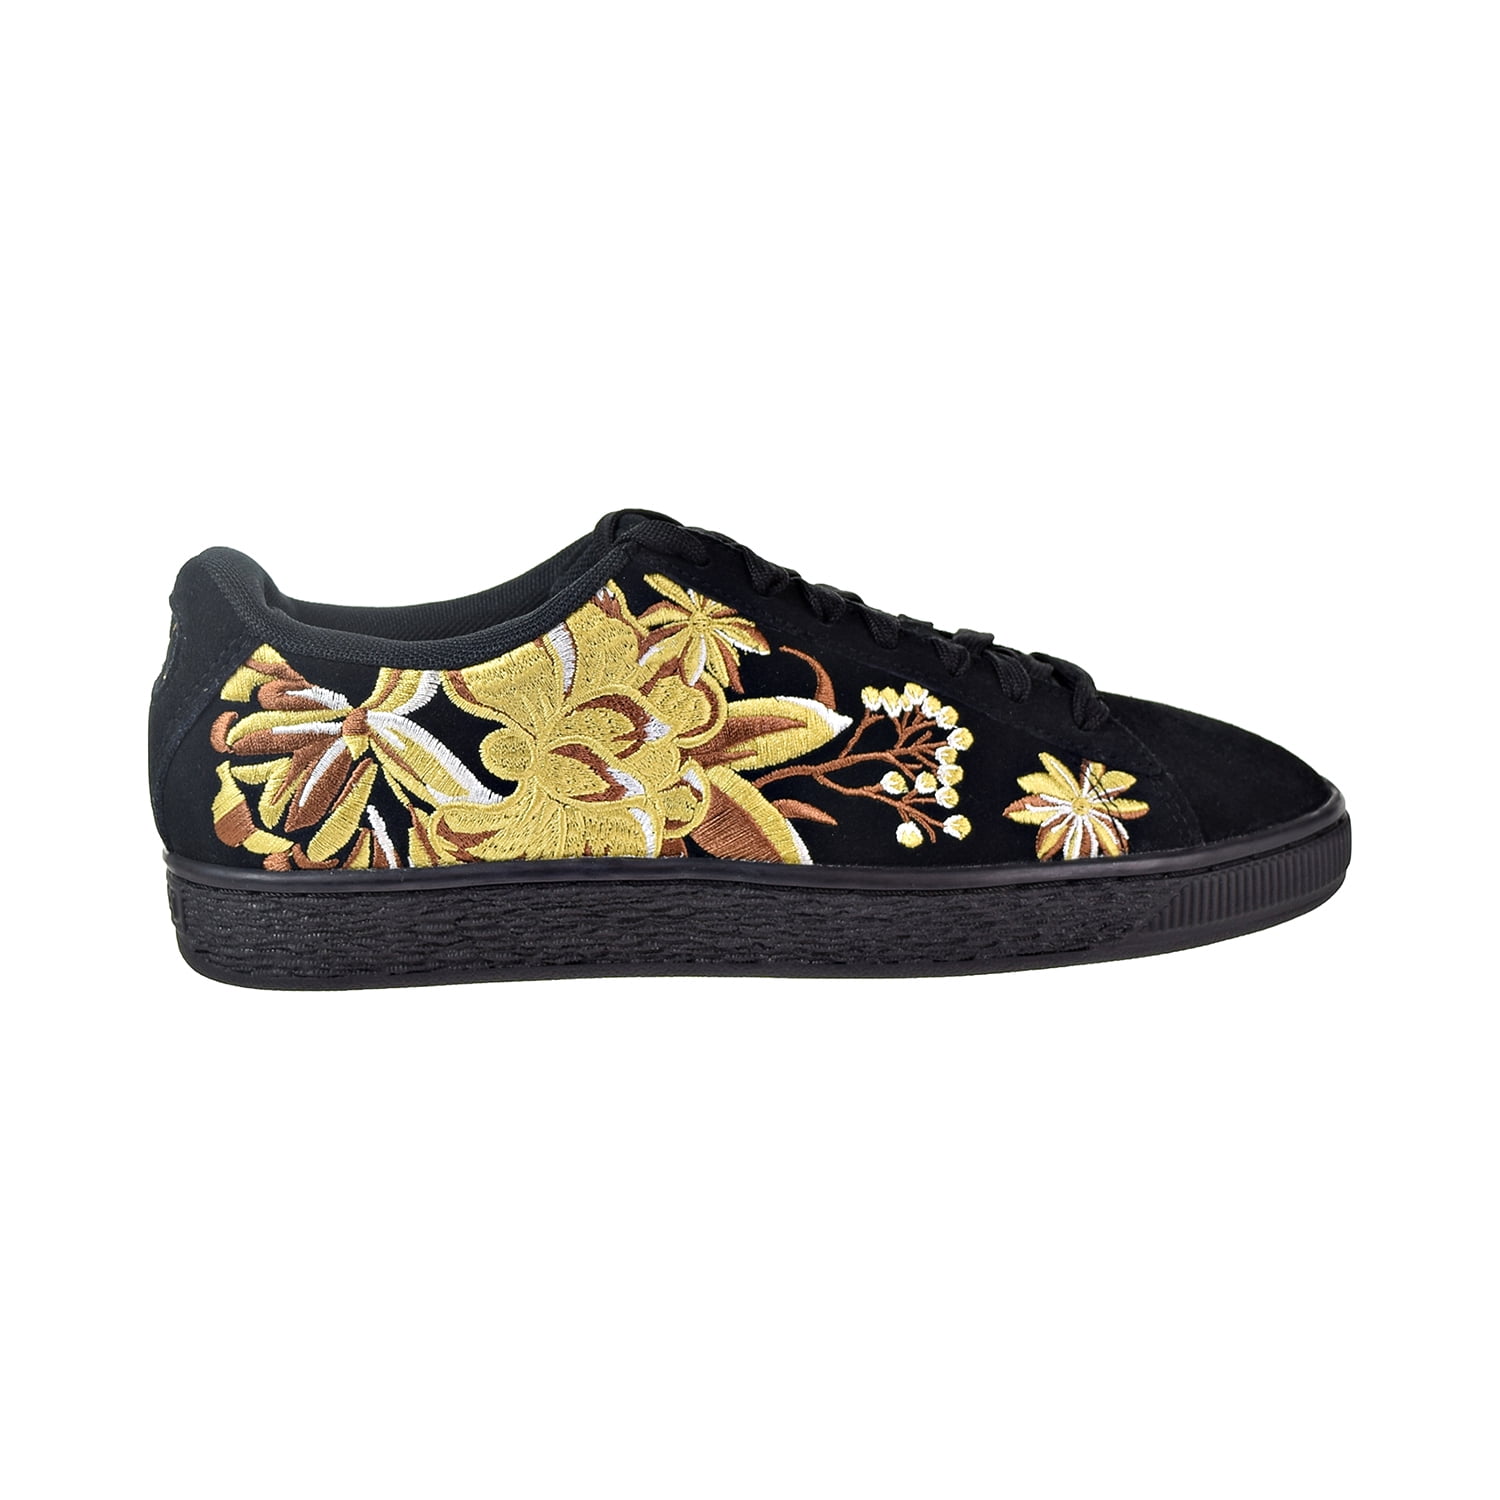 black puma shoes with gold